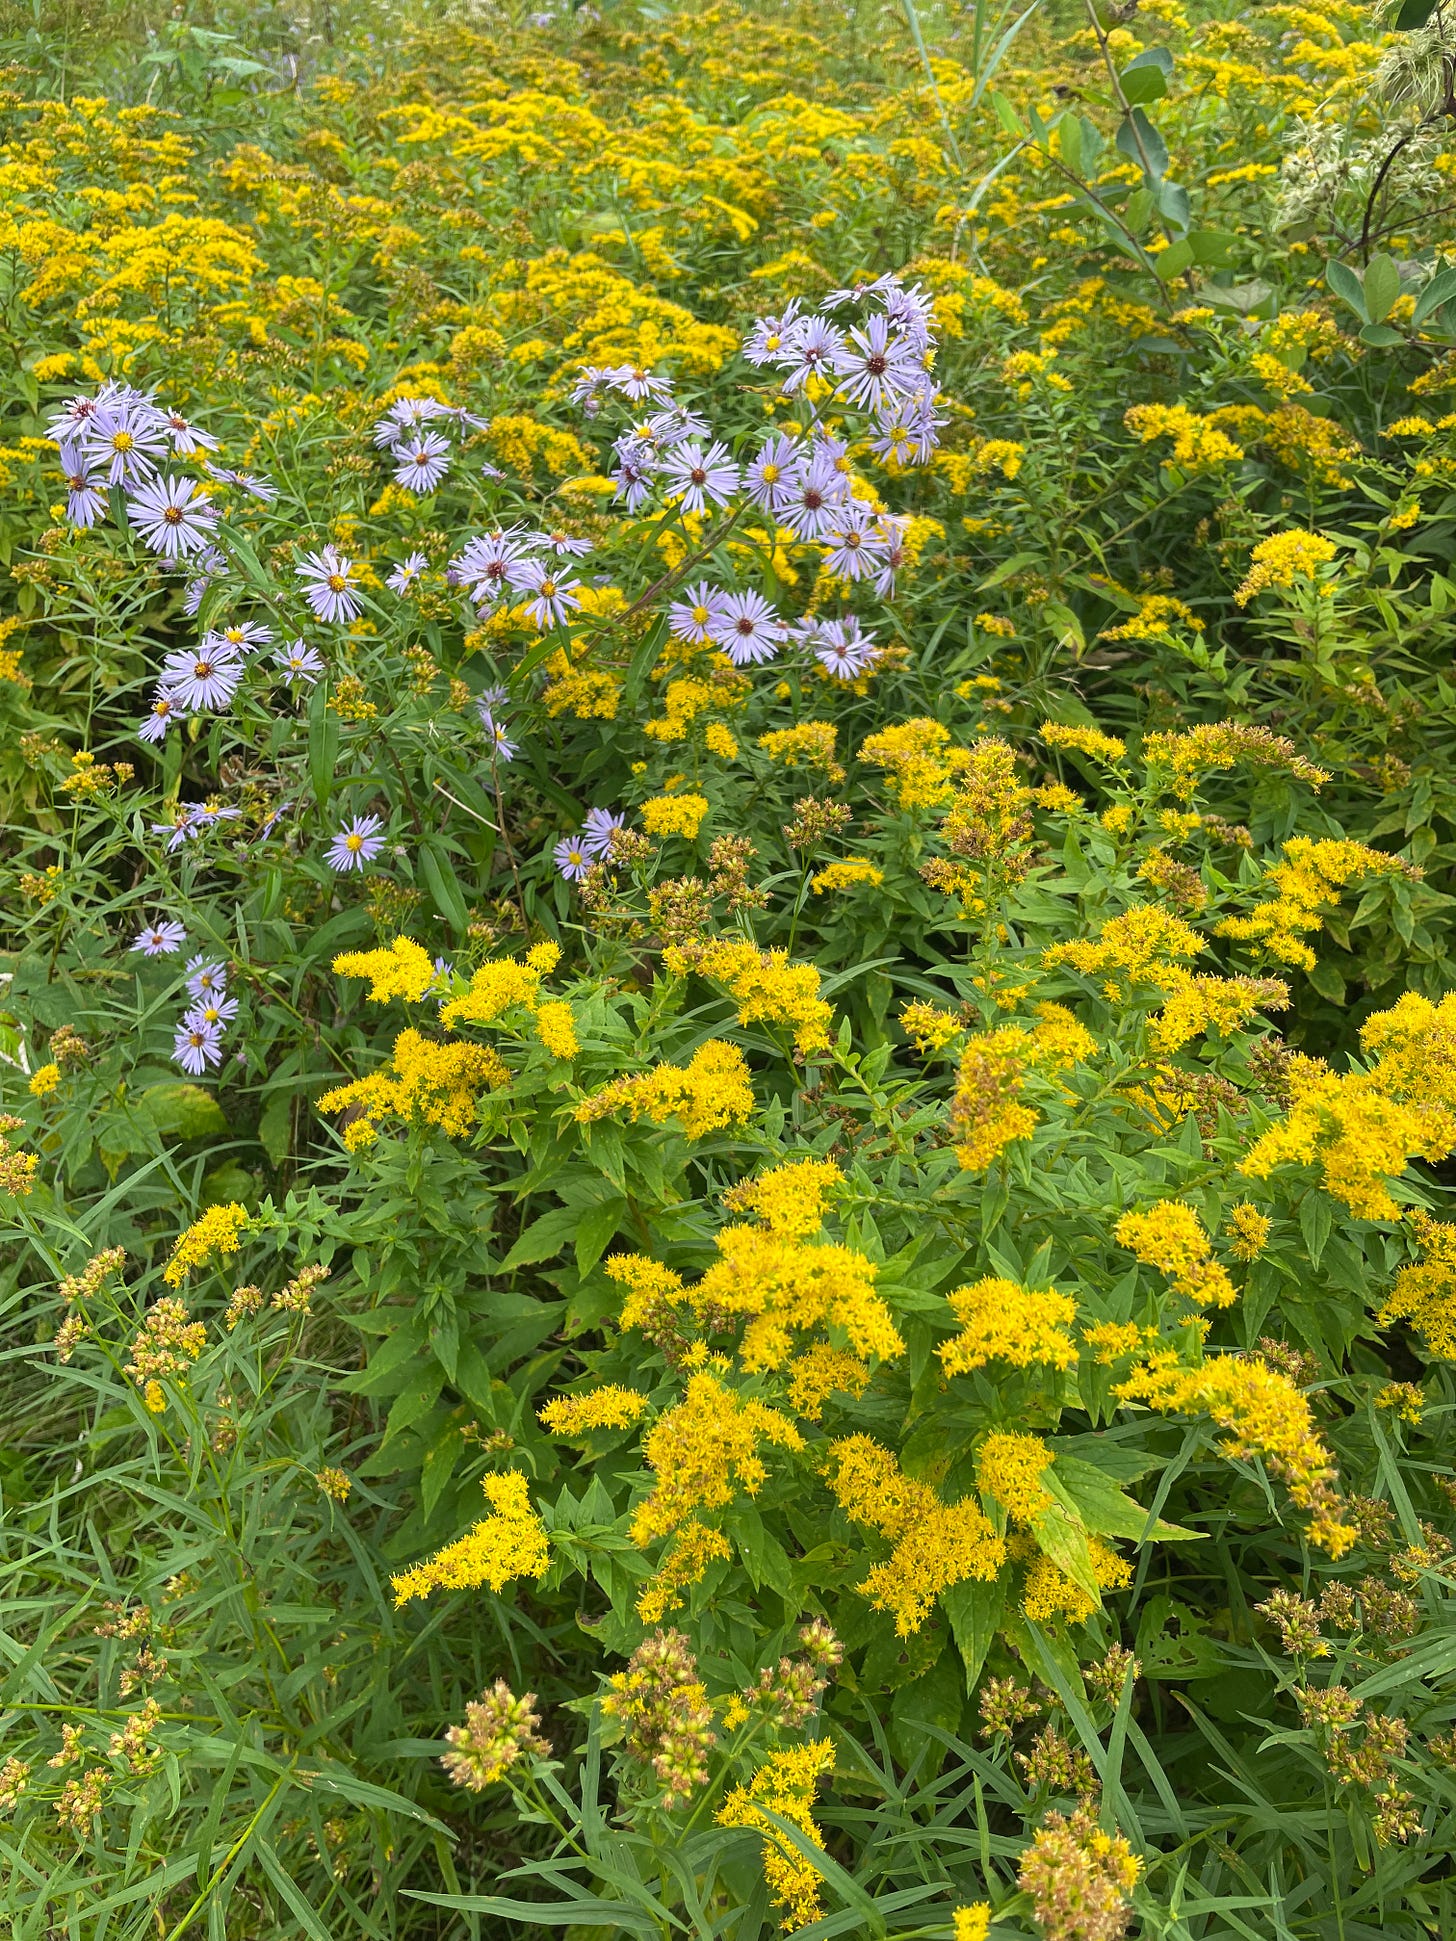 aster and goldenrod flowers